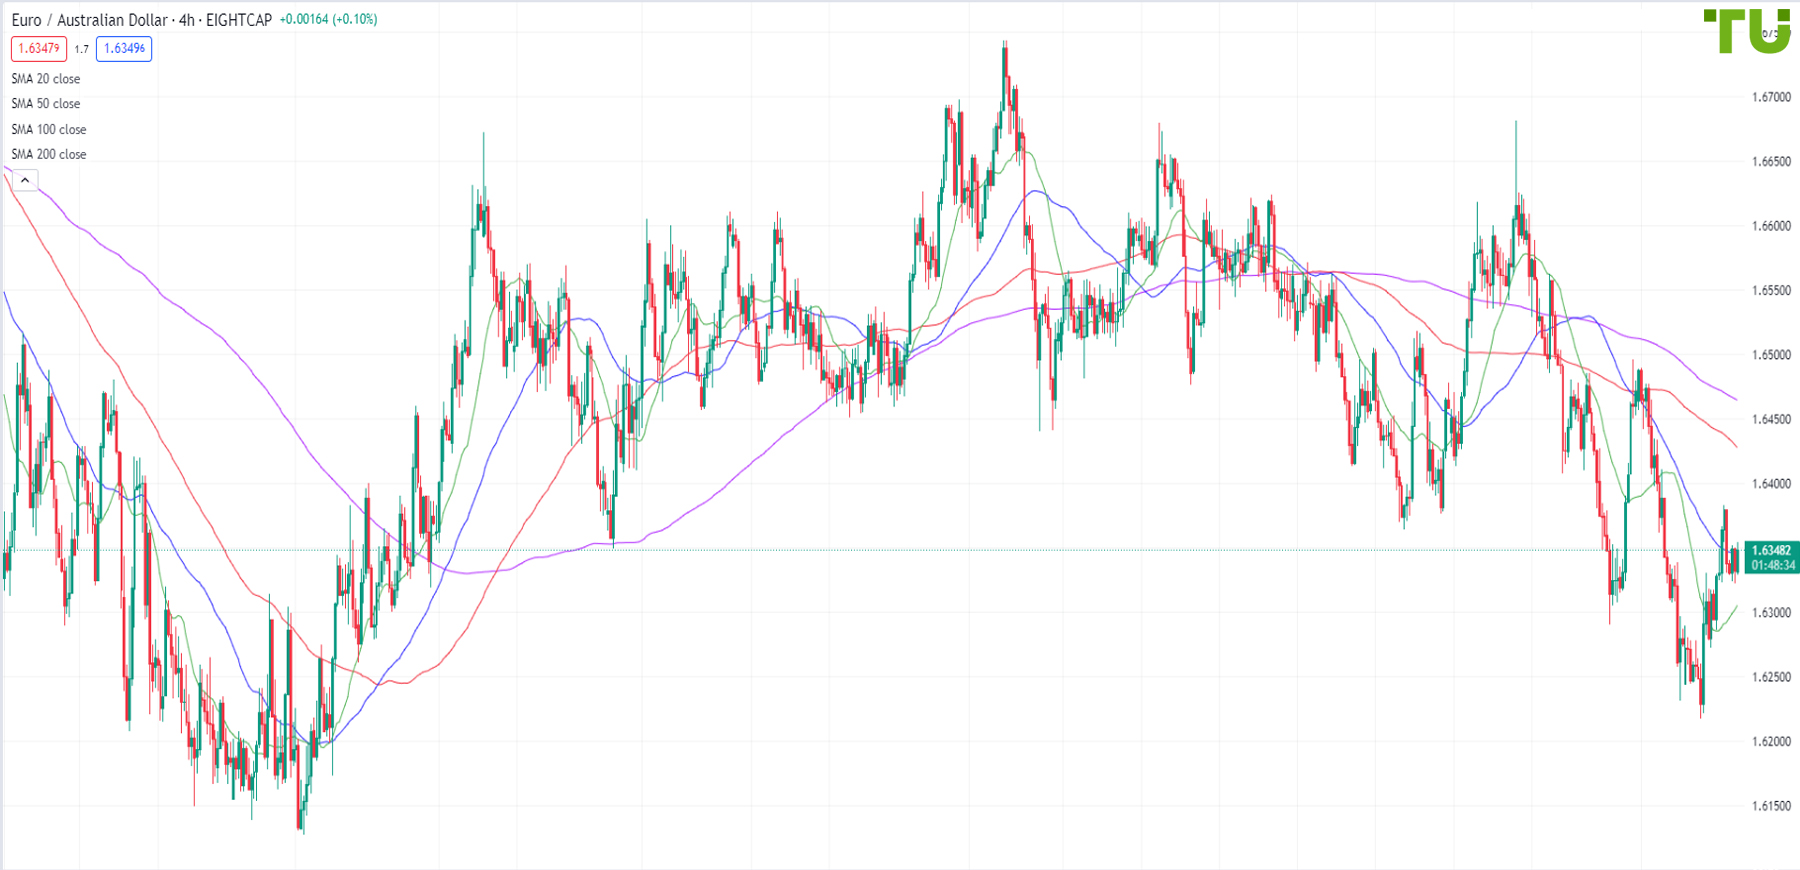 EUR/AUD remains under pressure after the rise